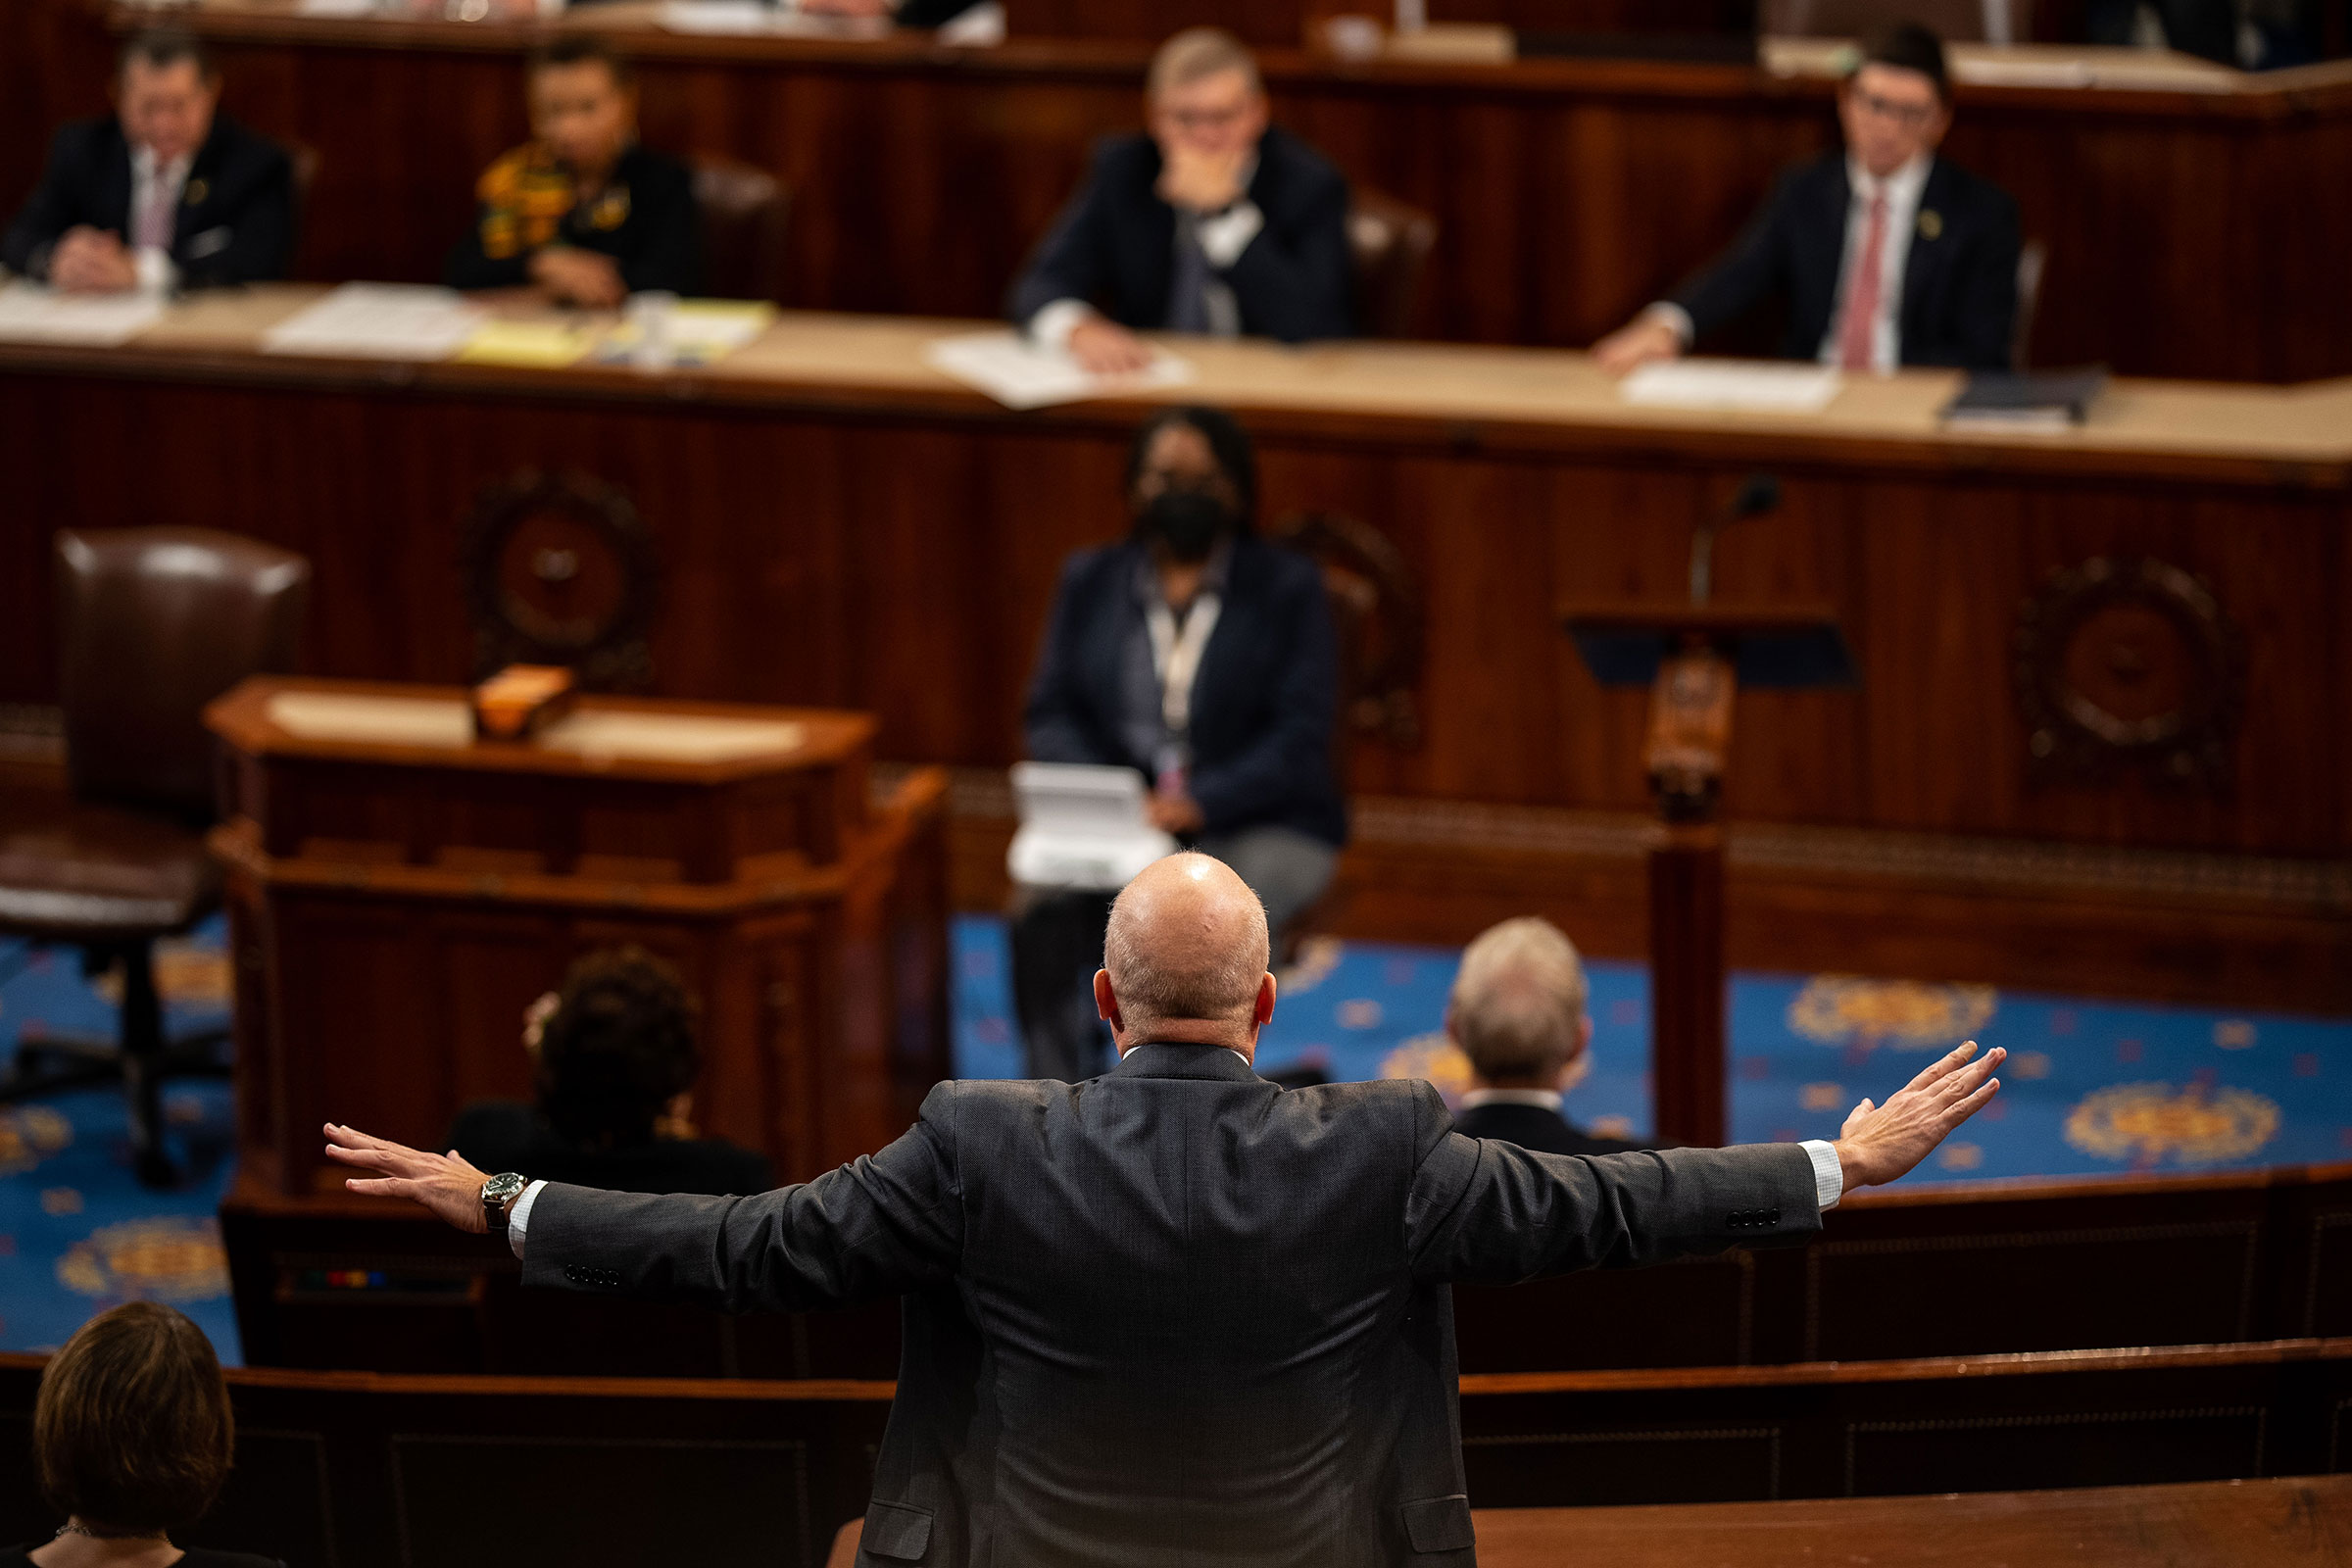 Rep. Chip Roy gestures while speaking in endorsing Rep. Jim Jordan for Speaker of the House on Jan. 3, 2023. (Kent Nishimura—Los Angeles Times/Getty Images)